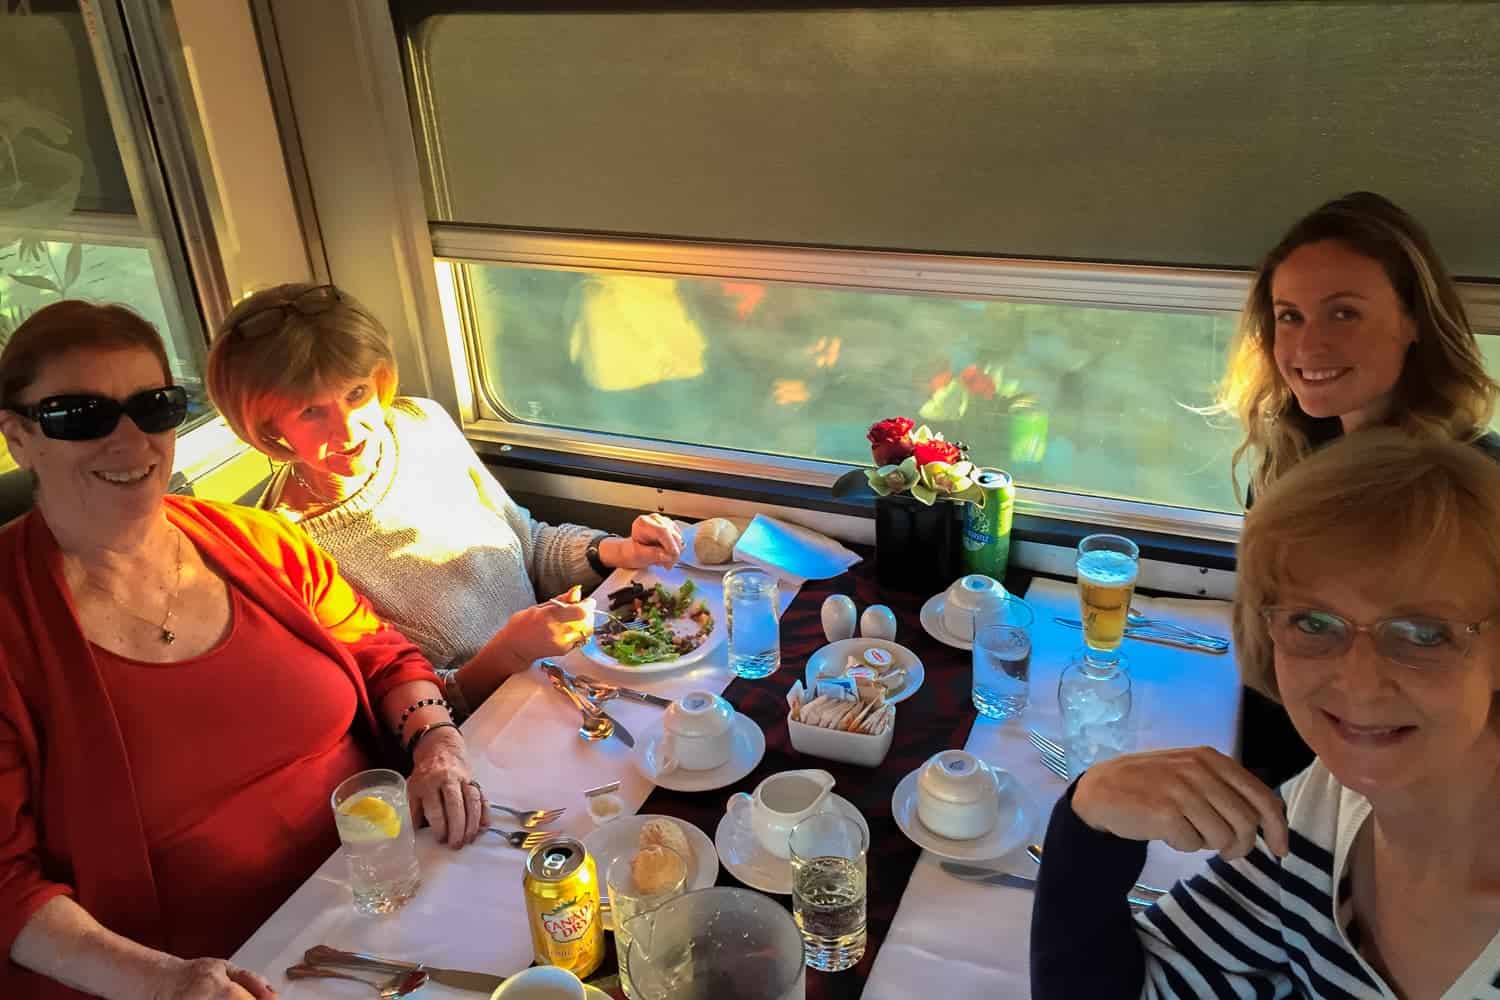 Dinner carriage on the Via Rail Train in Canada